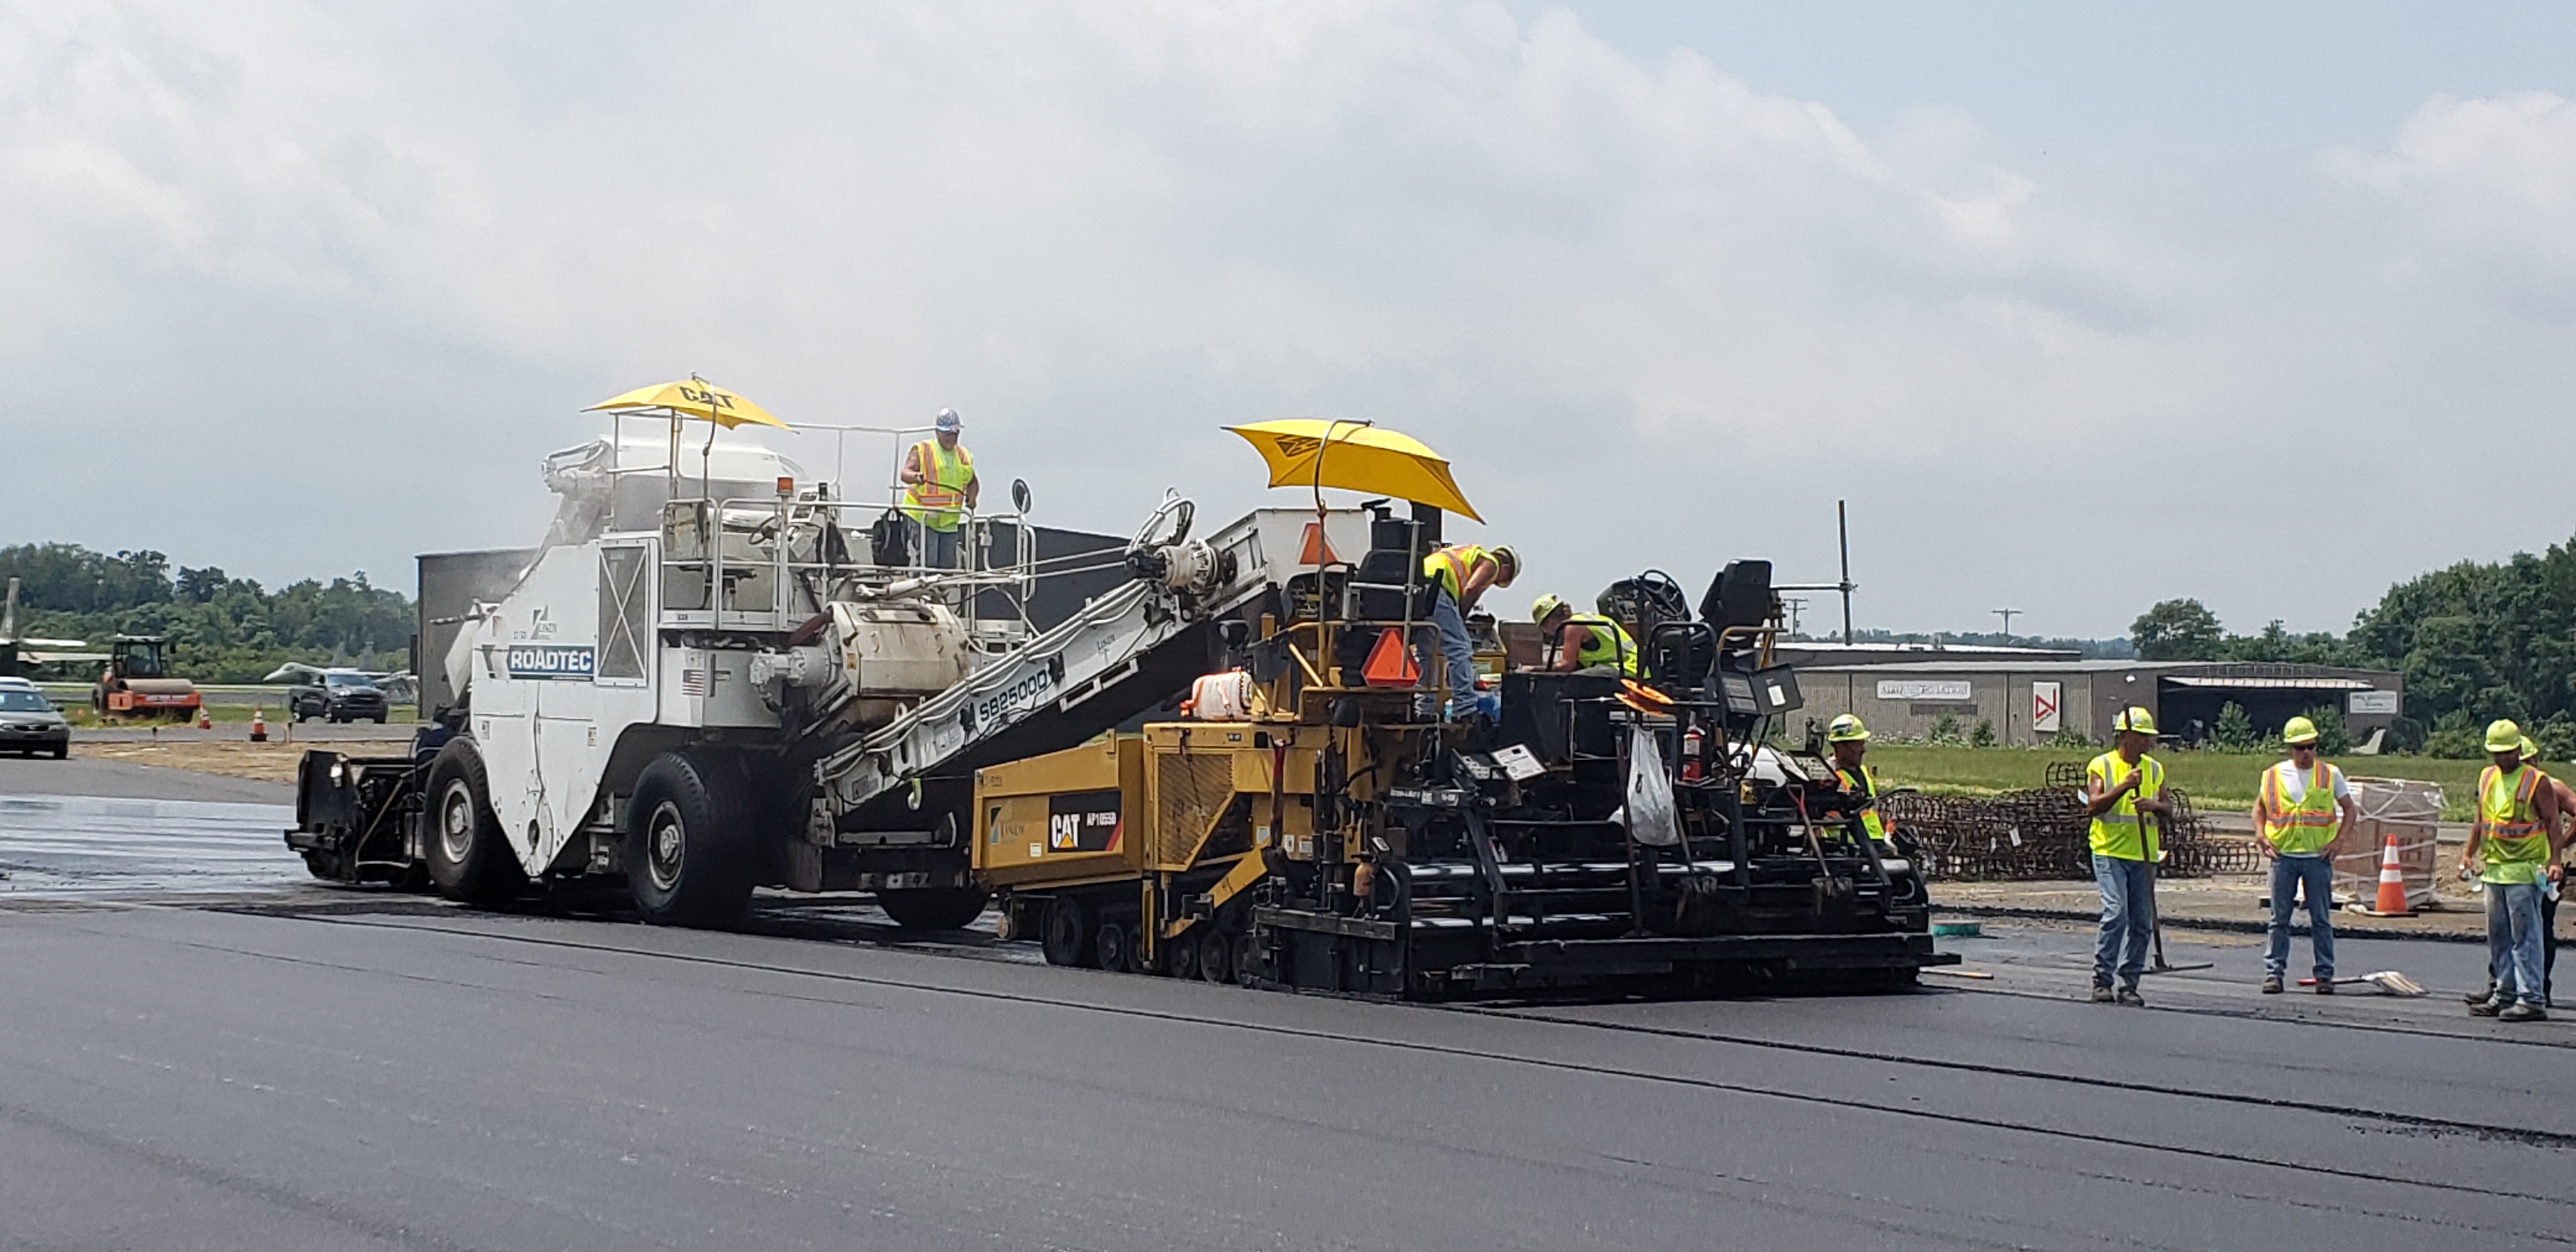 Crews in safety gear and a white and yellow asphalt equipment repaving a portion of Beaver County Airpot's tarmac.